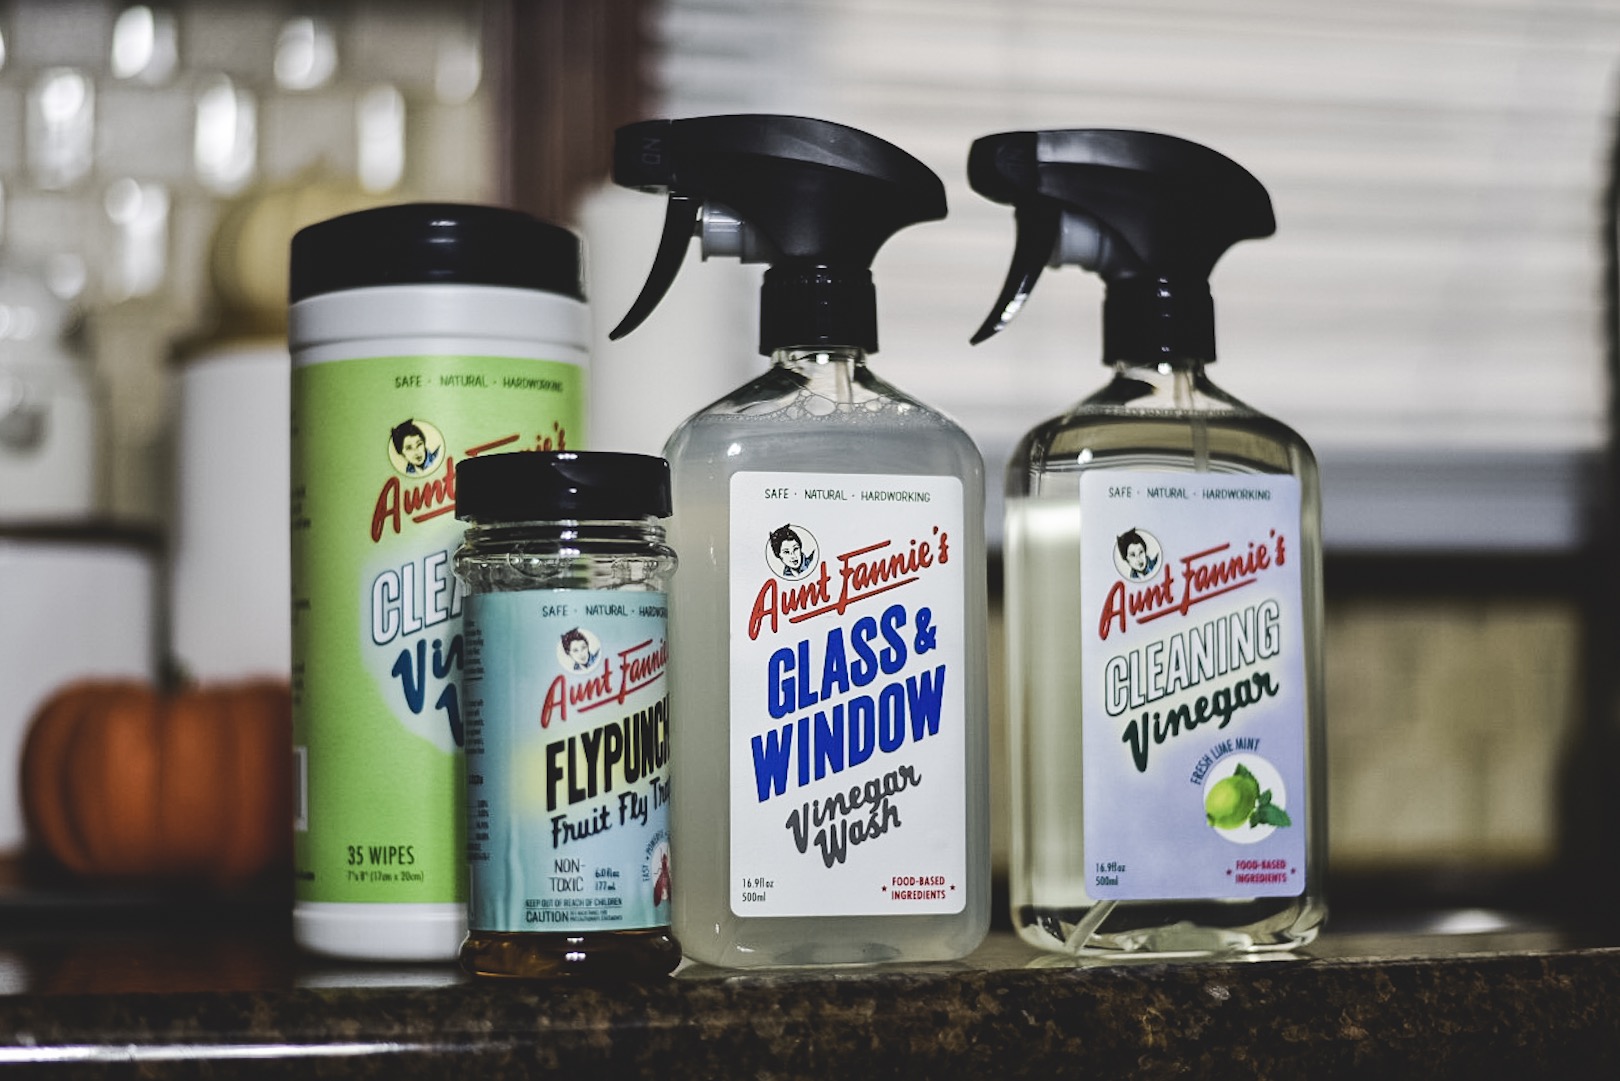 aunt fannie's #HomeSweetBiome #HealthierHousekeeping #PlantBased #NaturalCleaning